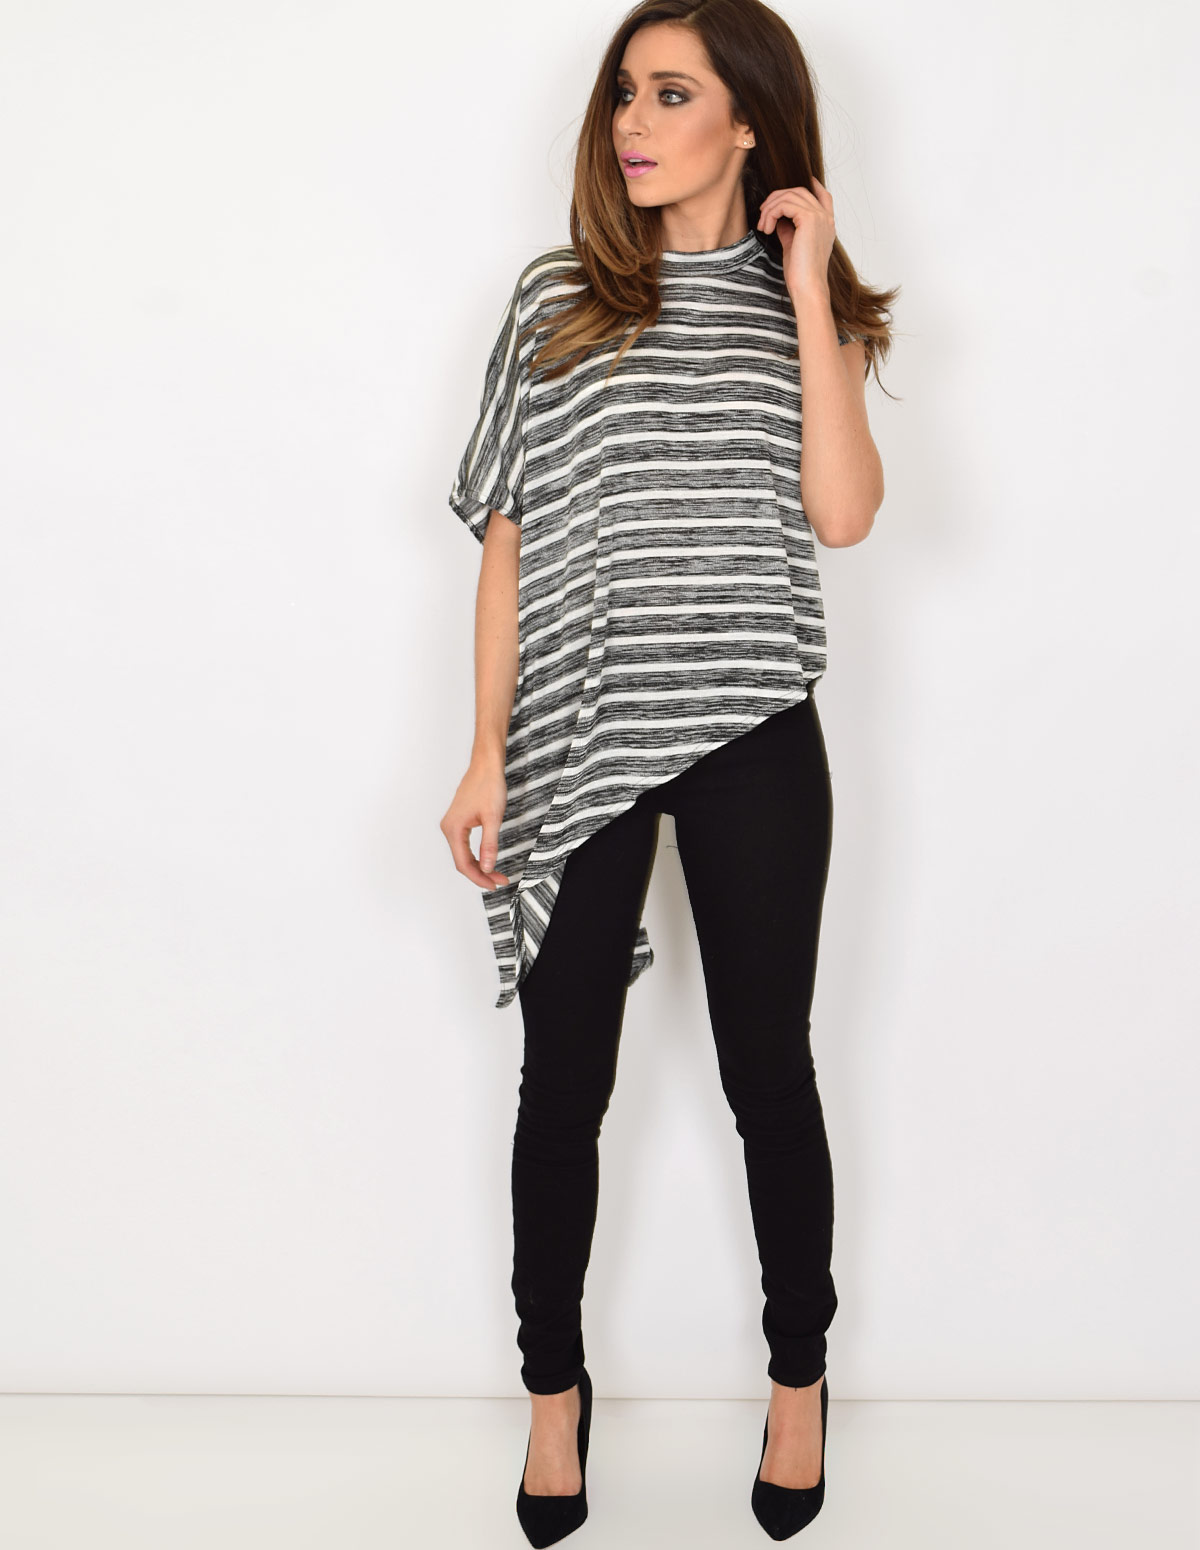 Long Shirts To Wear With Leggings Canada Covid